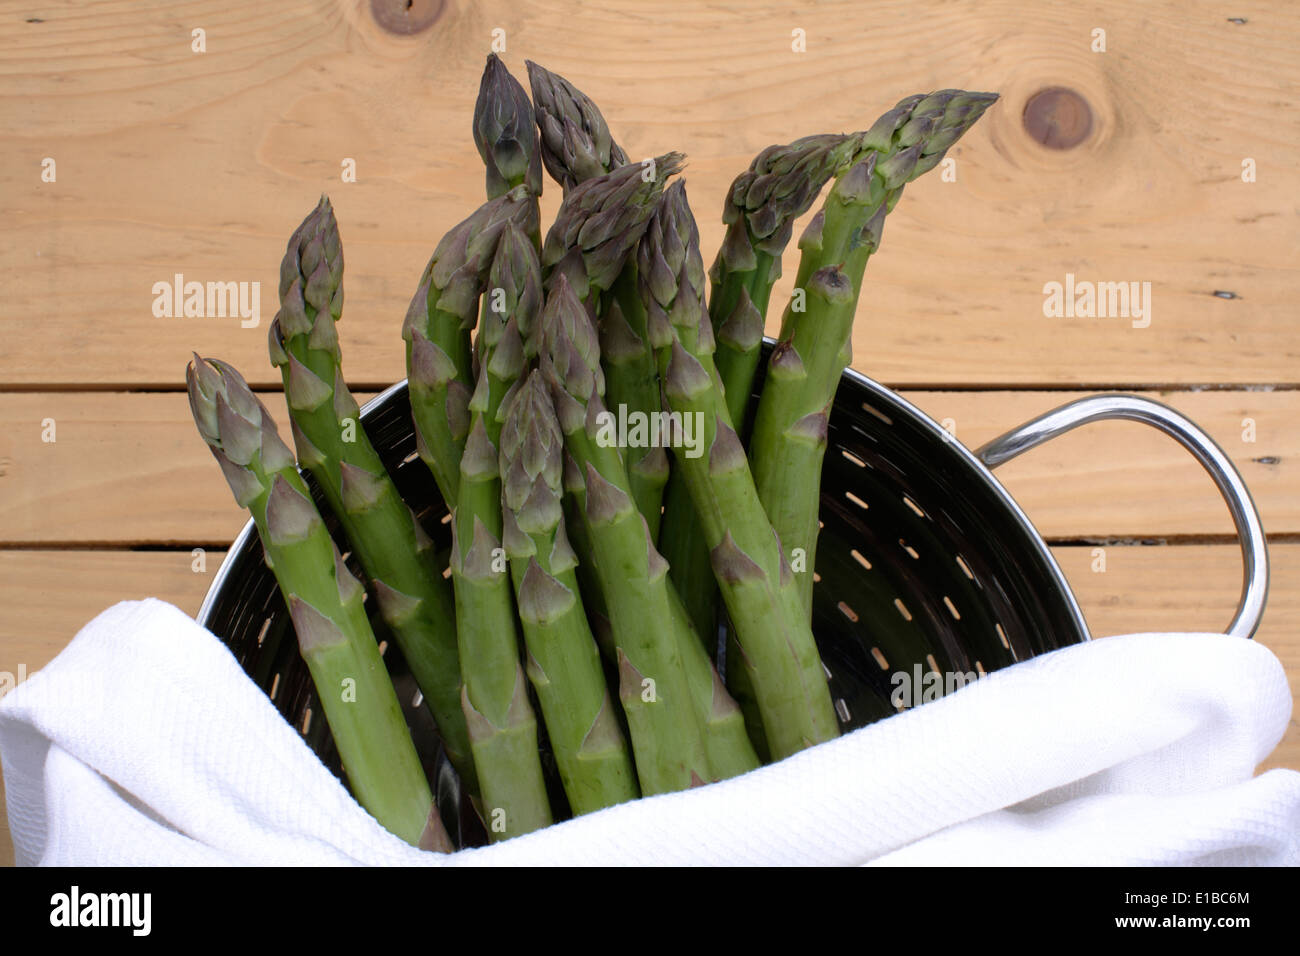 green asparagus lying in kitchenware Stock Photo